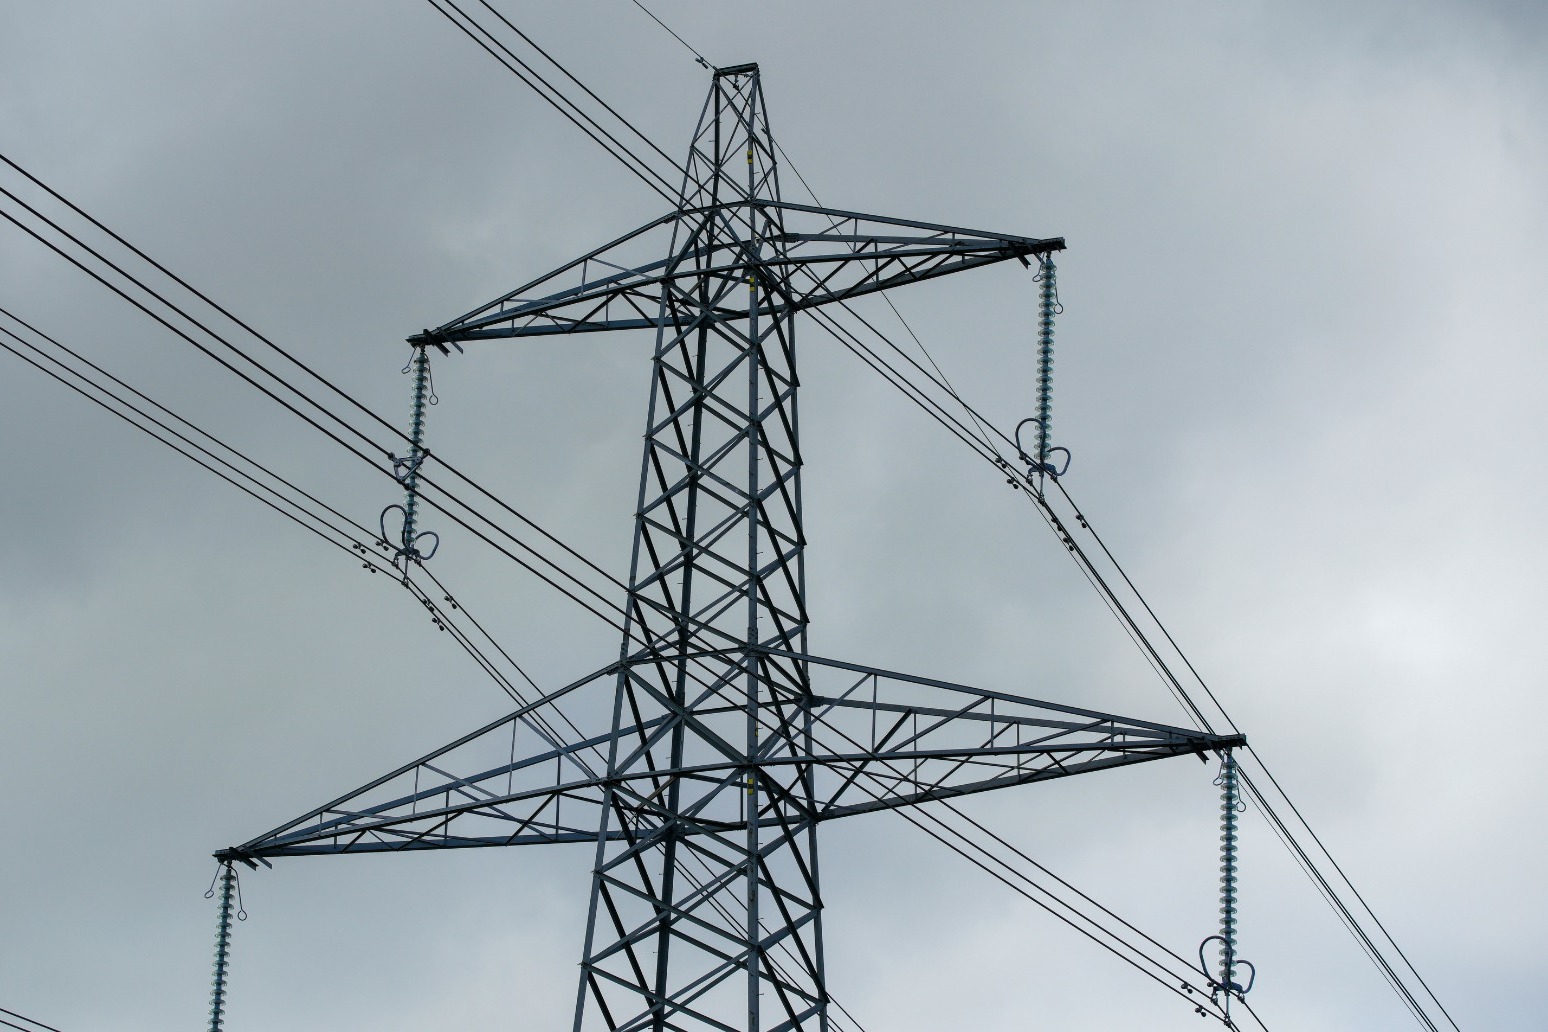 Electricity margins could be tight this winter grid firm says